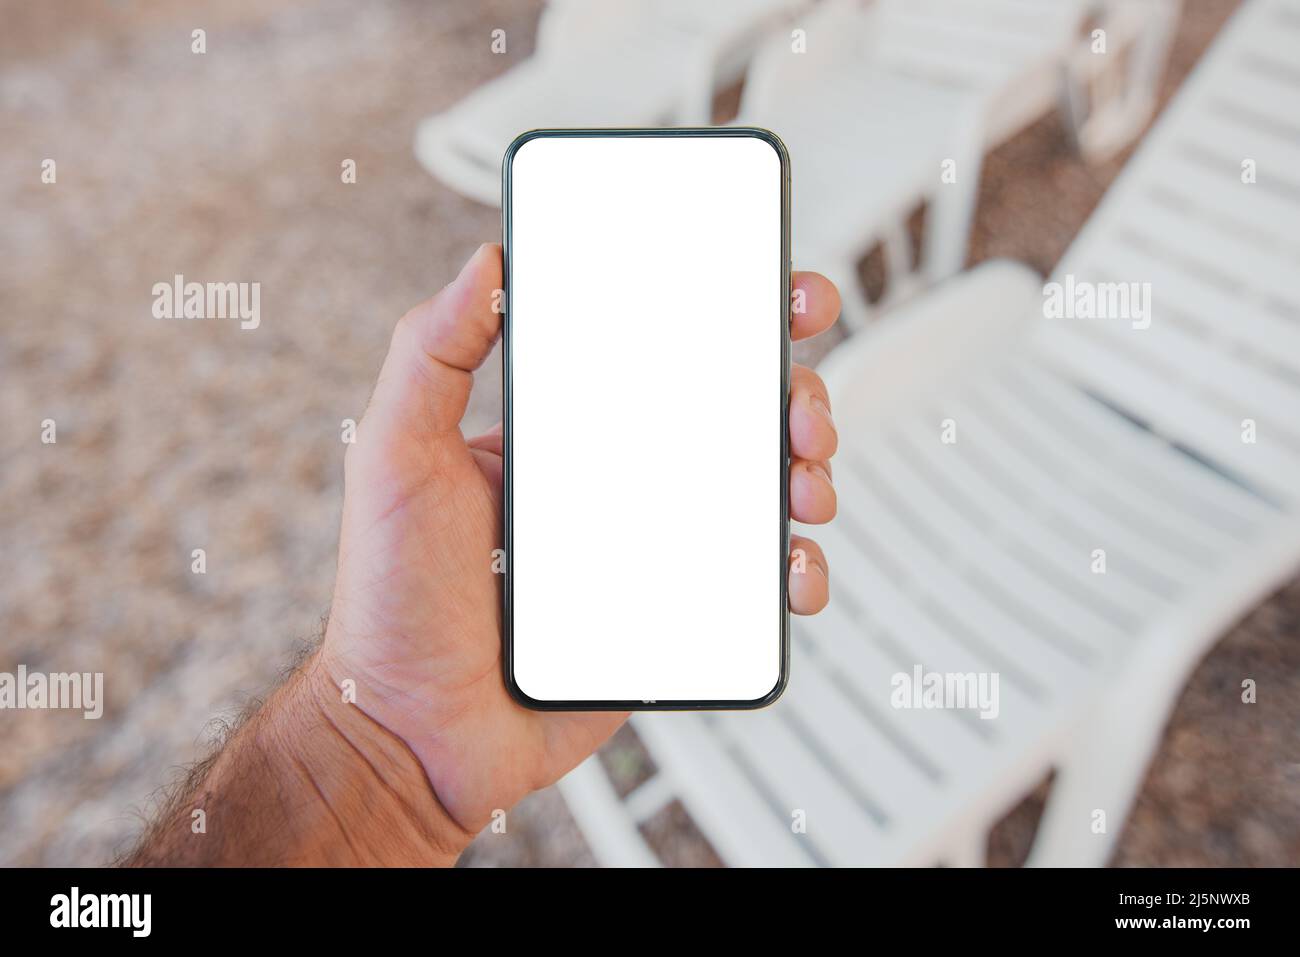 Mobile smart phone with blank mockup template screen in male hand, deck chair lounger in background, selective focus Stock Photo